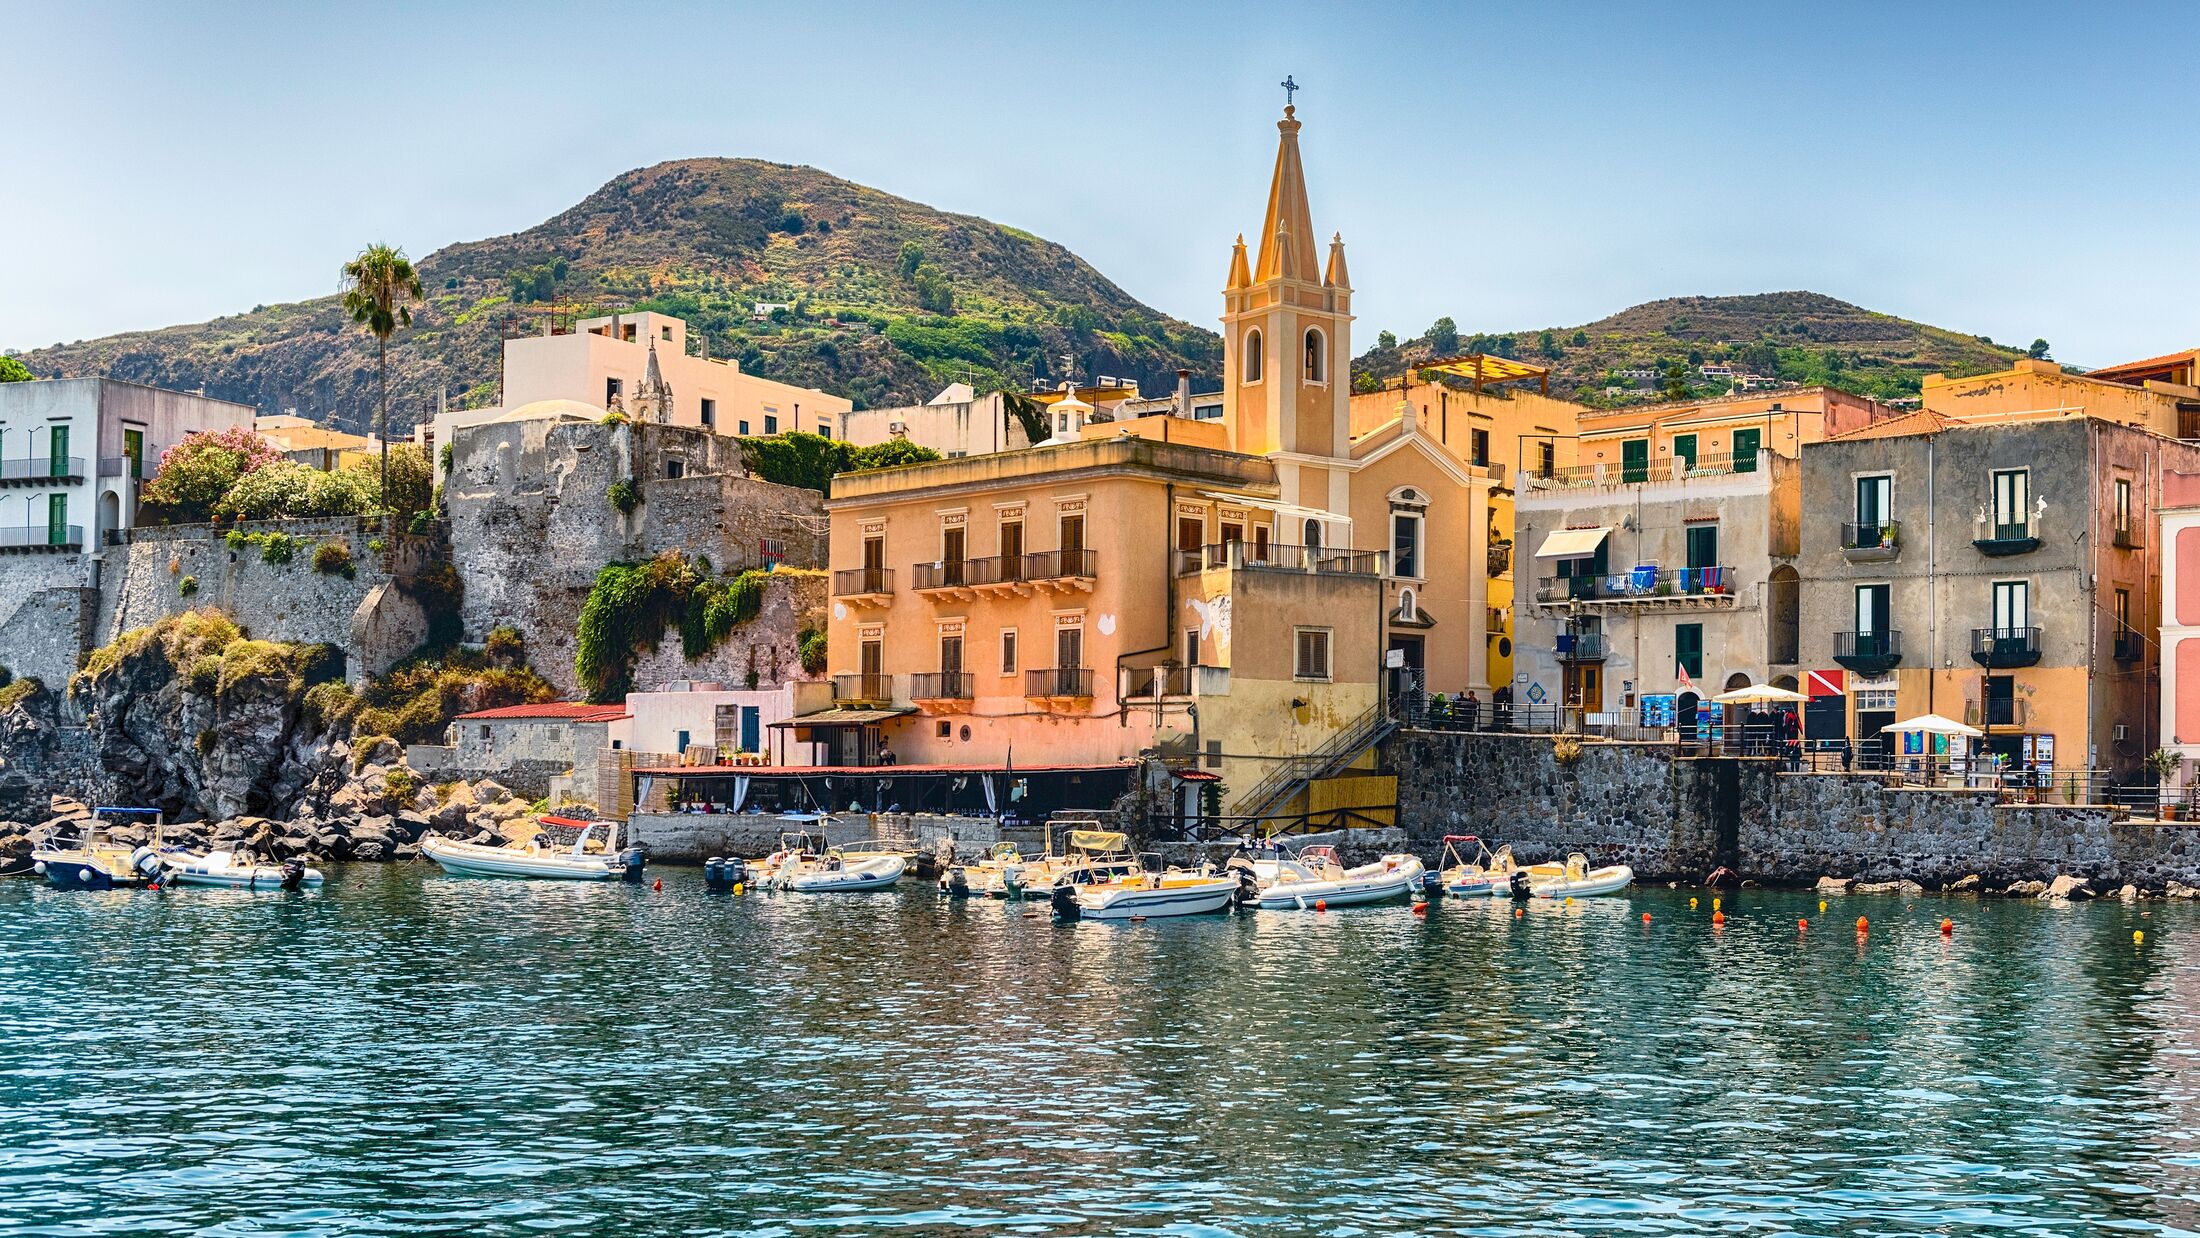 View of Marina Corta, smaller harbour in the main town of Lipari, the largest of the Aeolian Islands, Italy